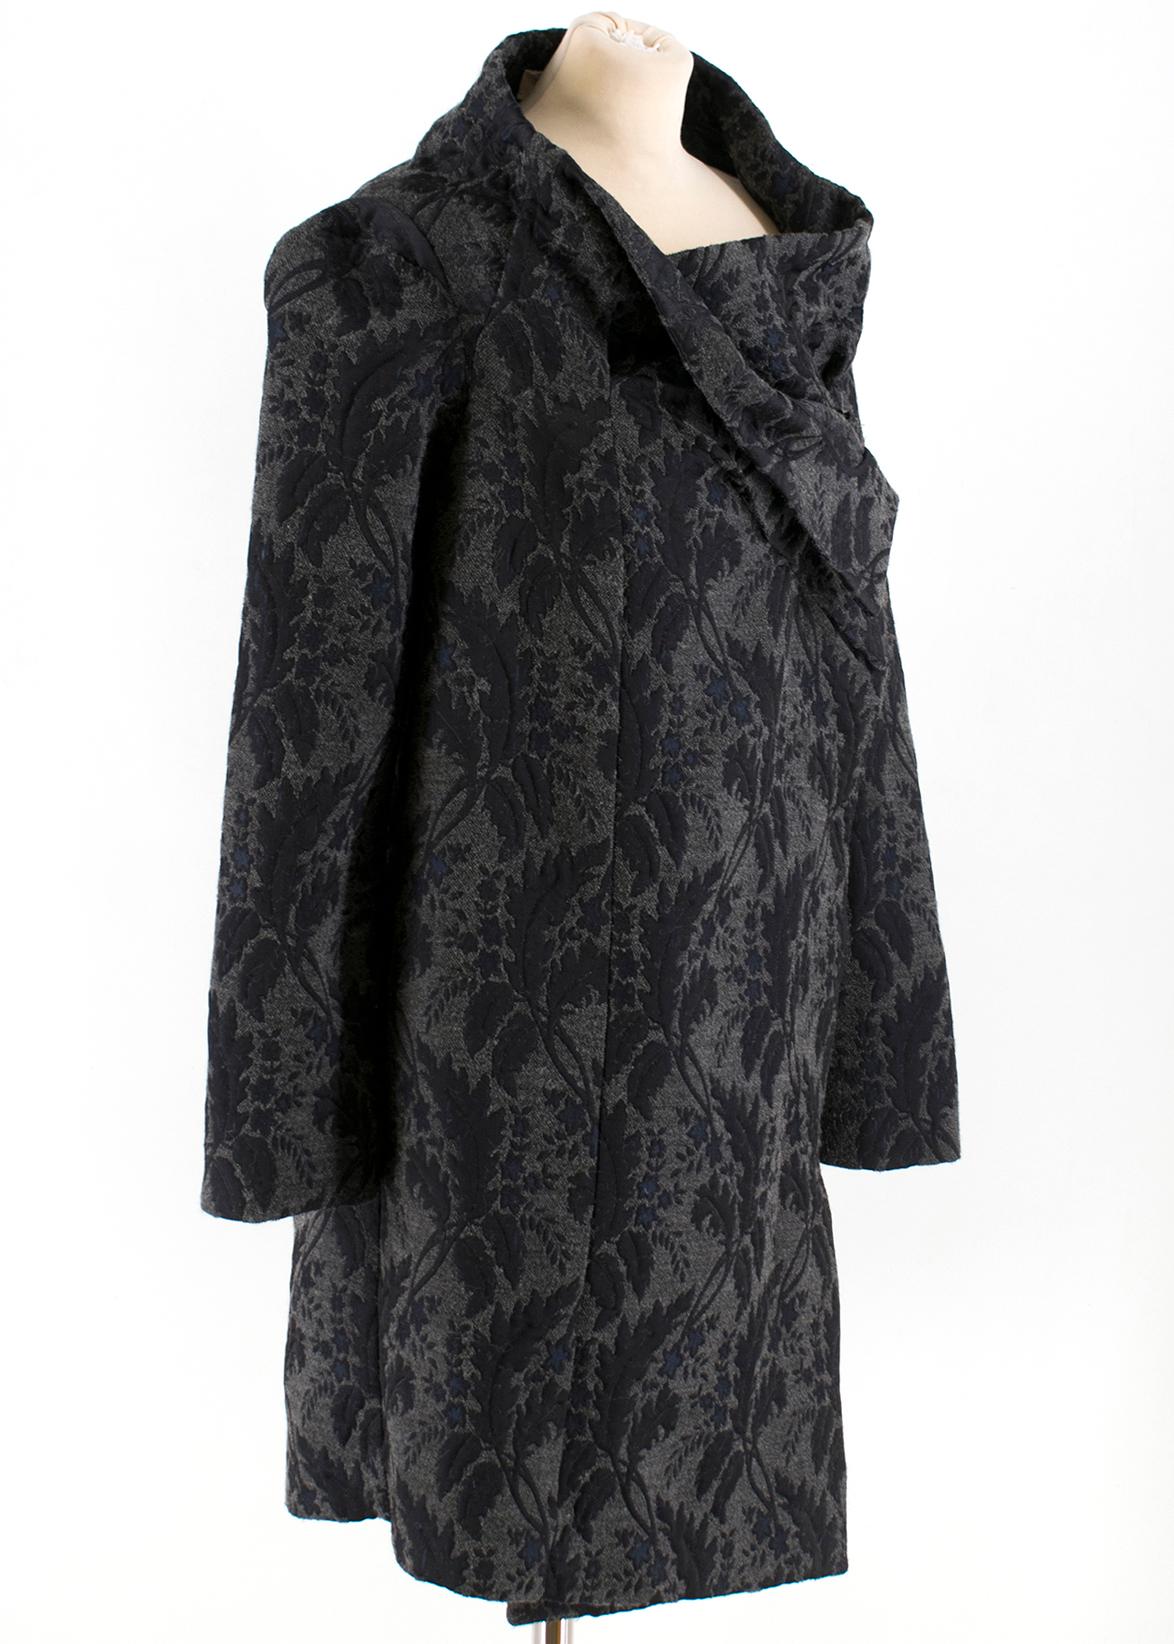 Marni Grey Virgin Wool Blend Floral Wrap Coat

- Wrap style
- Black/Grey floral print
- Unlined
- Made in Italy 
- Professional cleaning only
- Hidden zip fastening 
- Two front slip pockets  
- Two concealed buttons

Please note, these items are